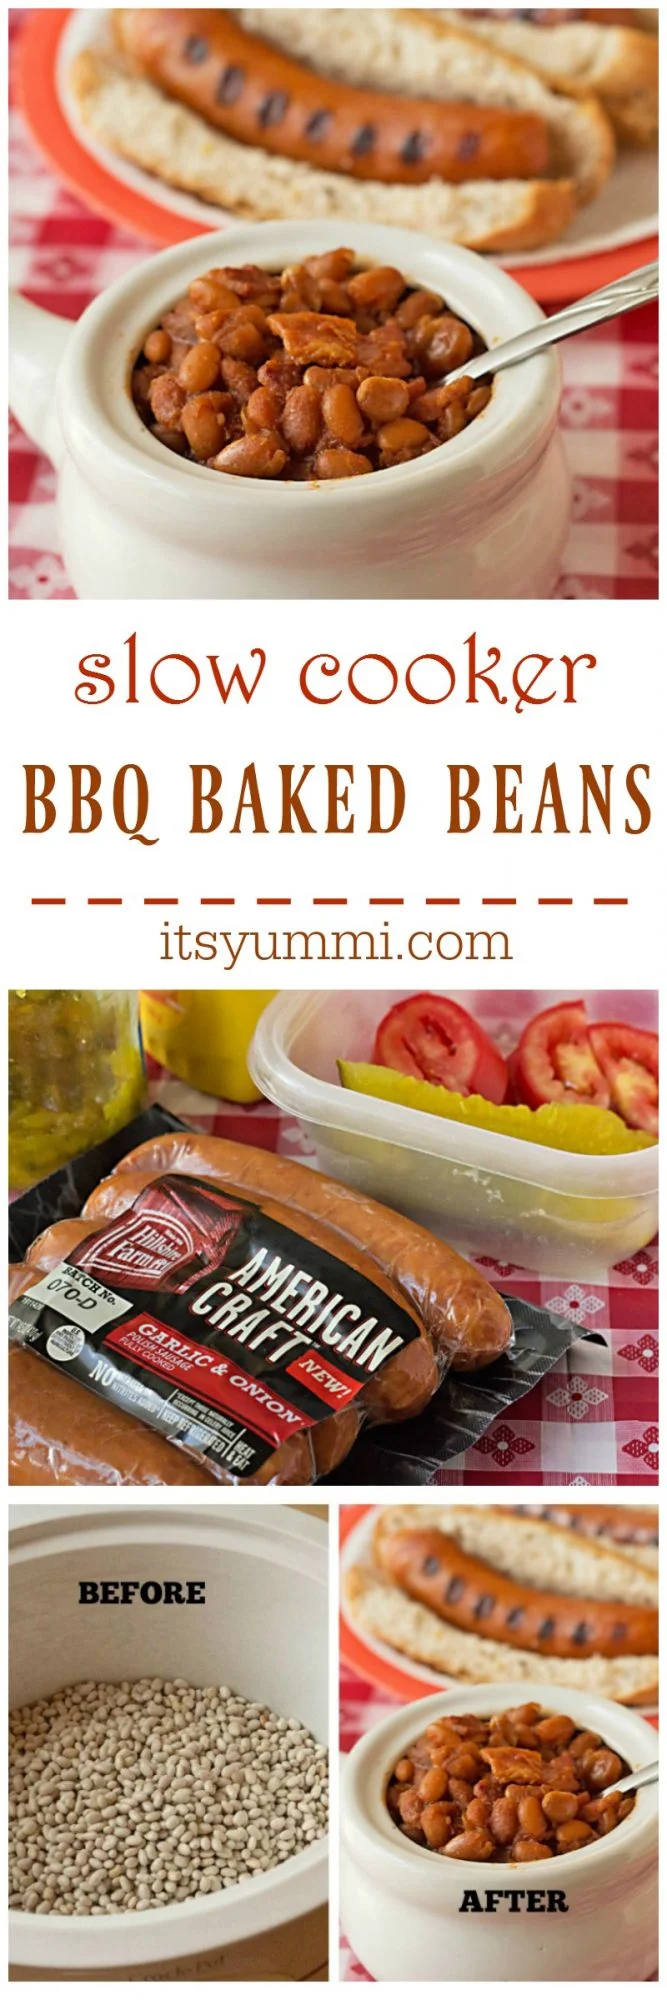 Slow Cooker BBQ Baked Beans Recipe, from itsyummi.com